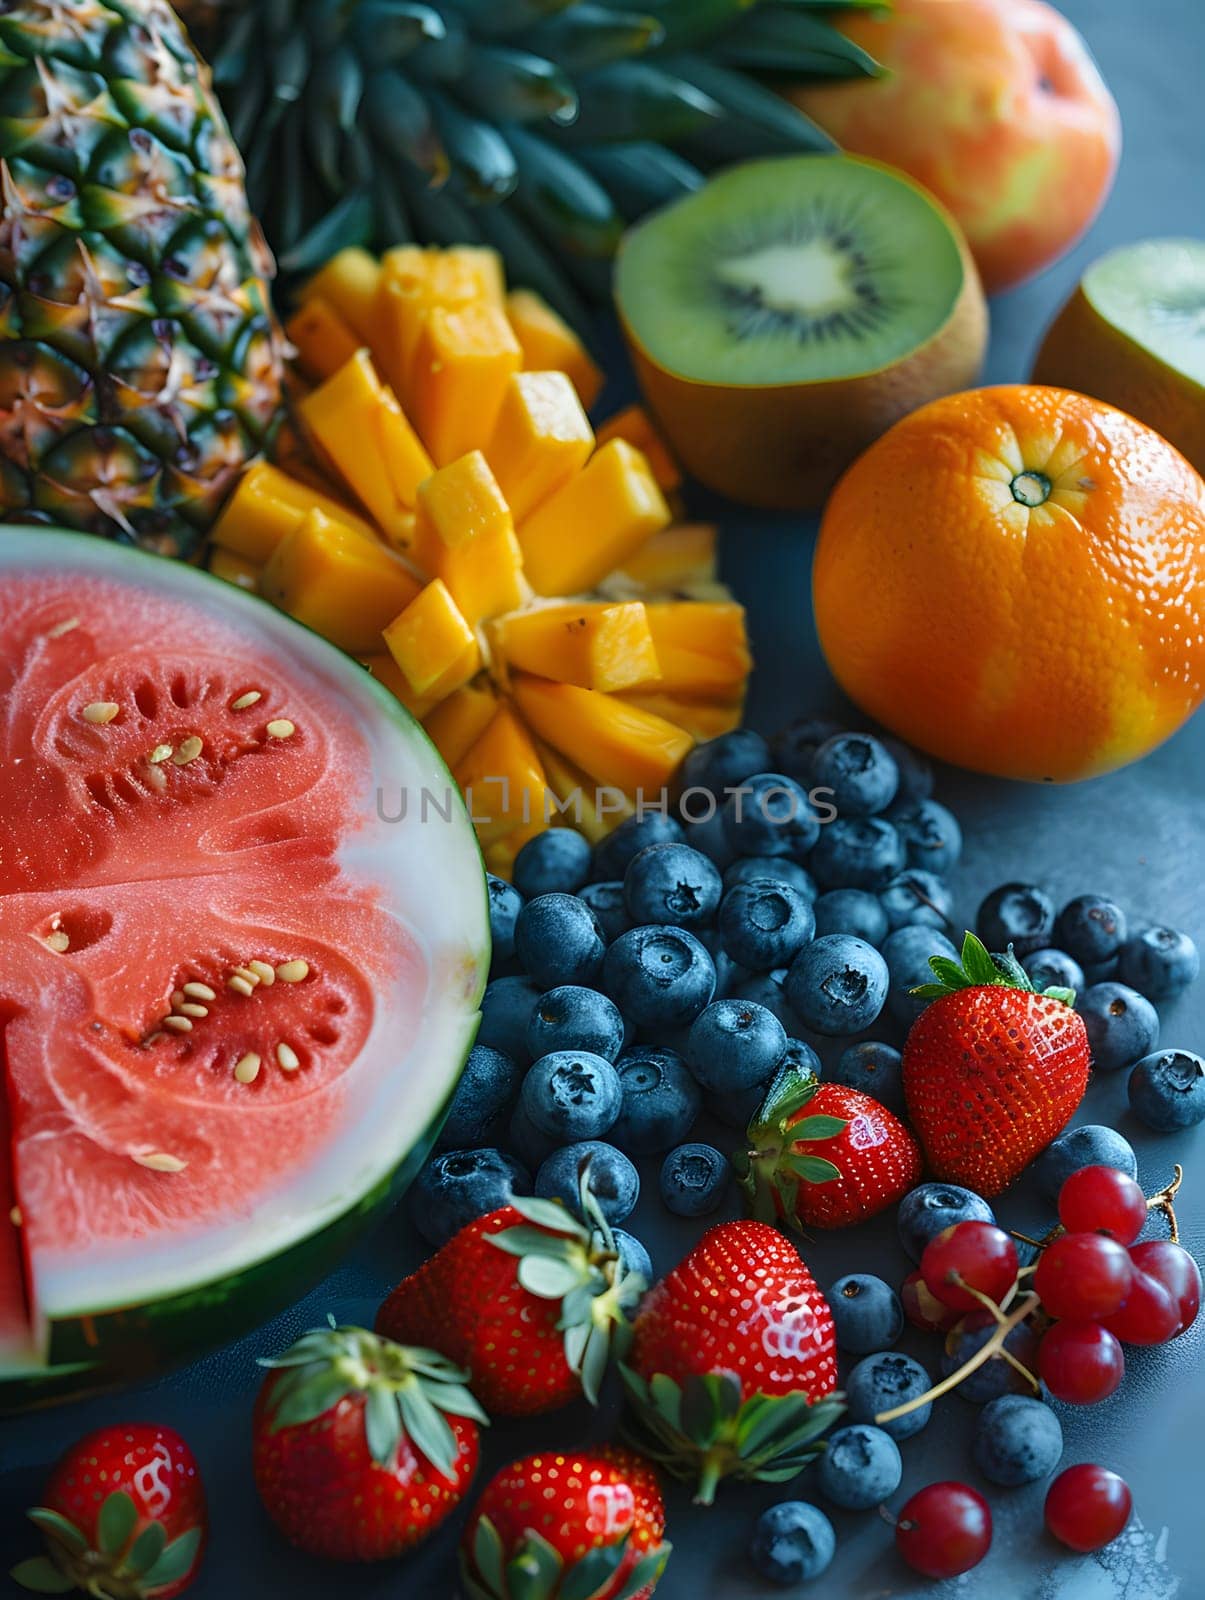 A selection of natural foods including fruit and berries such as watermelon Citrullus, are displayed on a table with dishware and tableware for a delicious recipe or dish